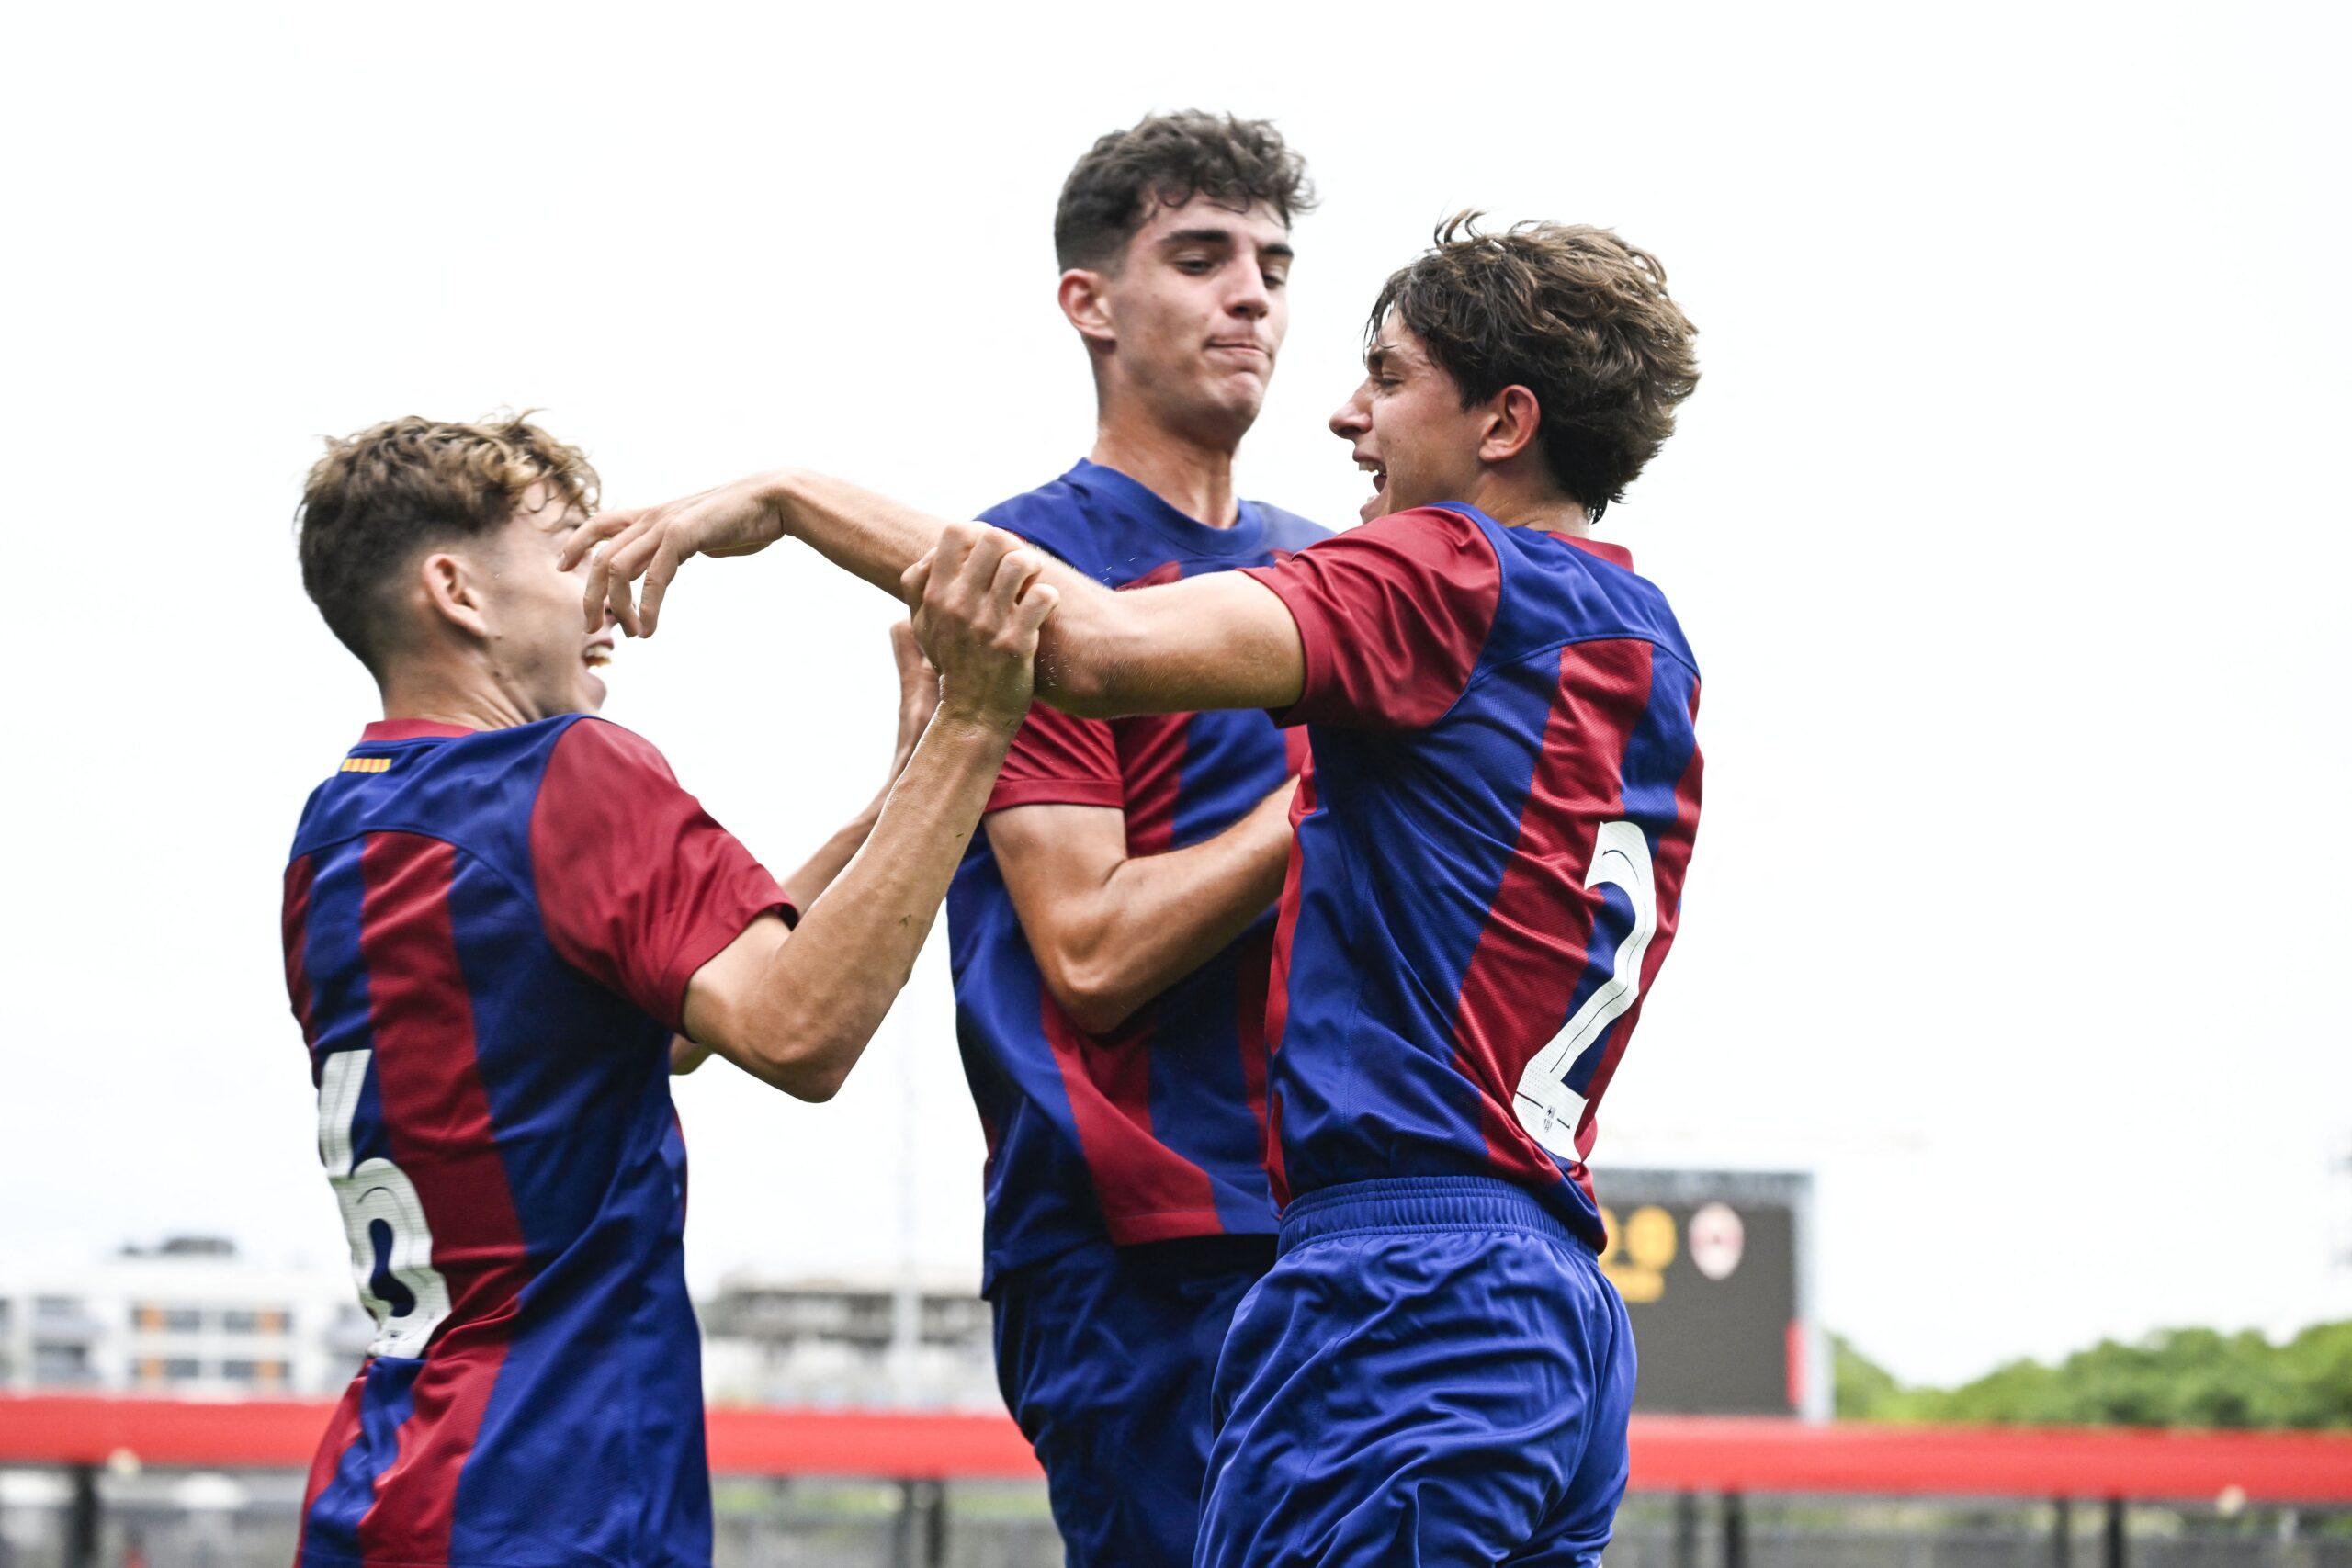 Barcelona's Alexis Olmedo celebrates after scoring during a soccer game between Spanish FC Barcelona and Belgian Royal Antwerp FC, on Tuesday 19 September 2023 in Barcelona, Spain, on day 1 of the UEFA Youth League competition.